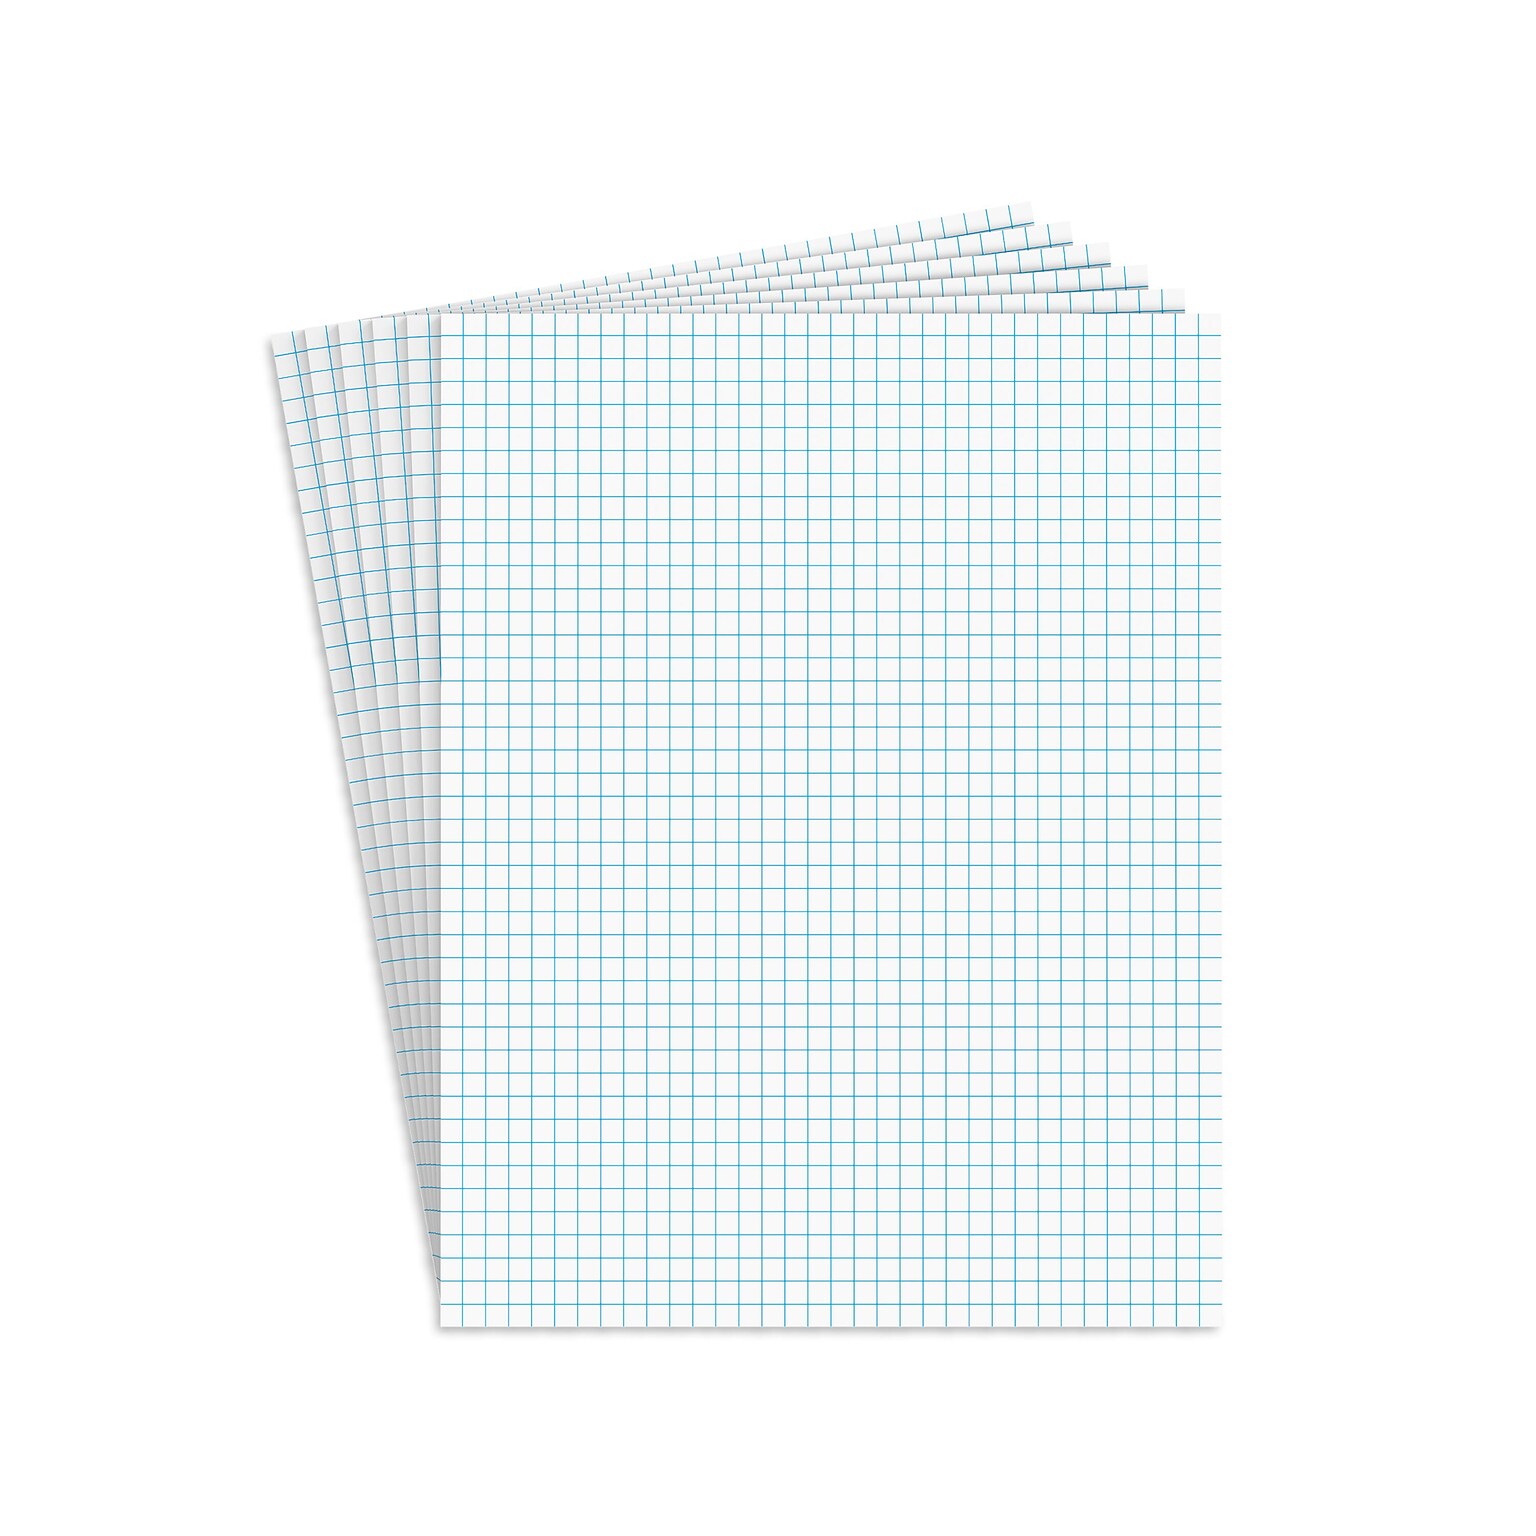 Staples® Notepads, 8.5 x 11, Graph Ruled, White, 50 Sheets/Pad, 6 Pads/Pack (ST57333)